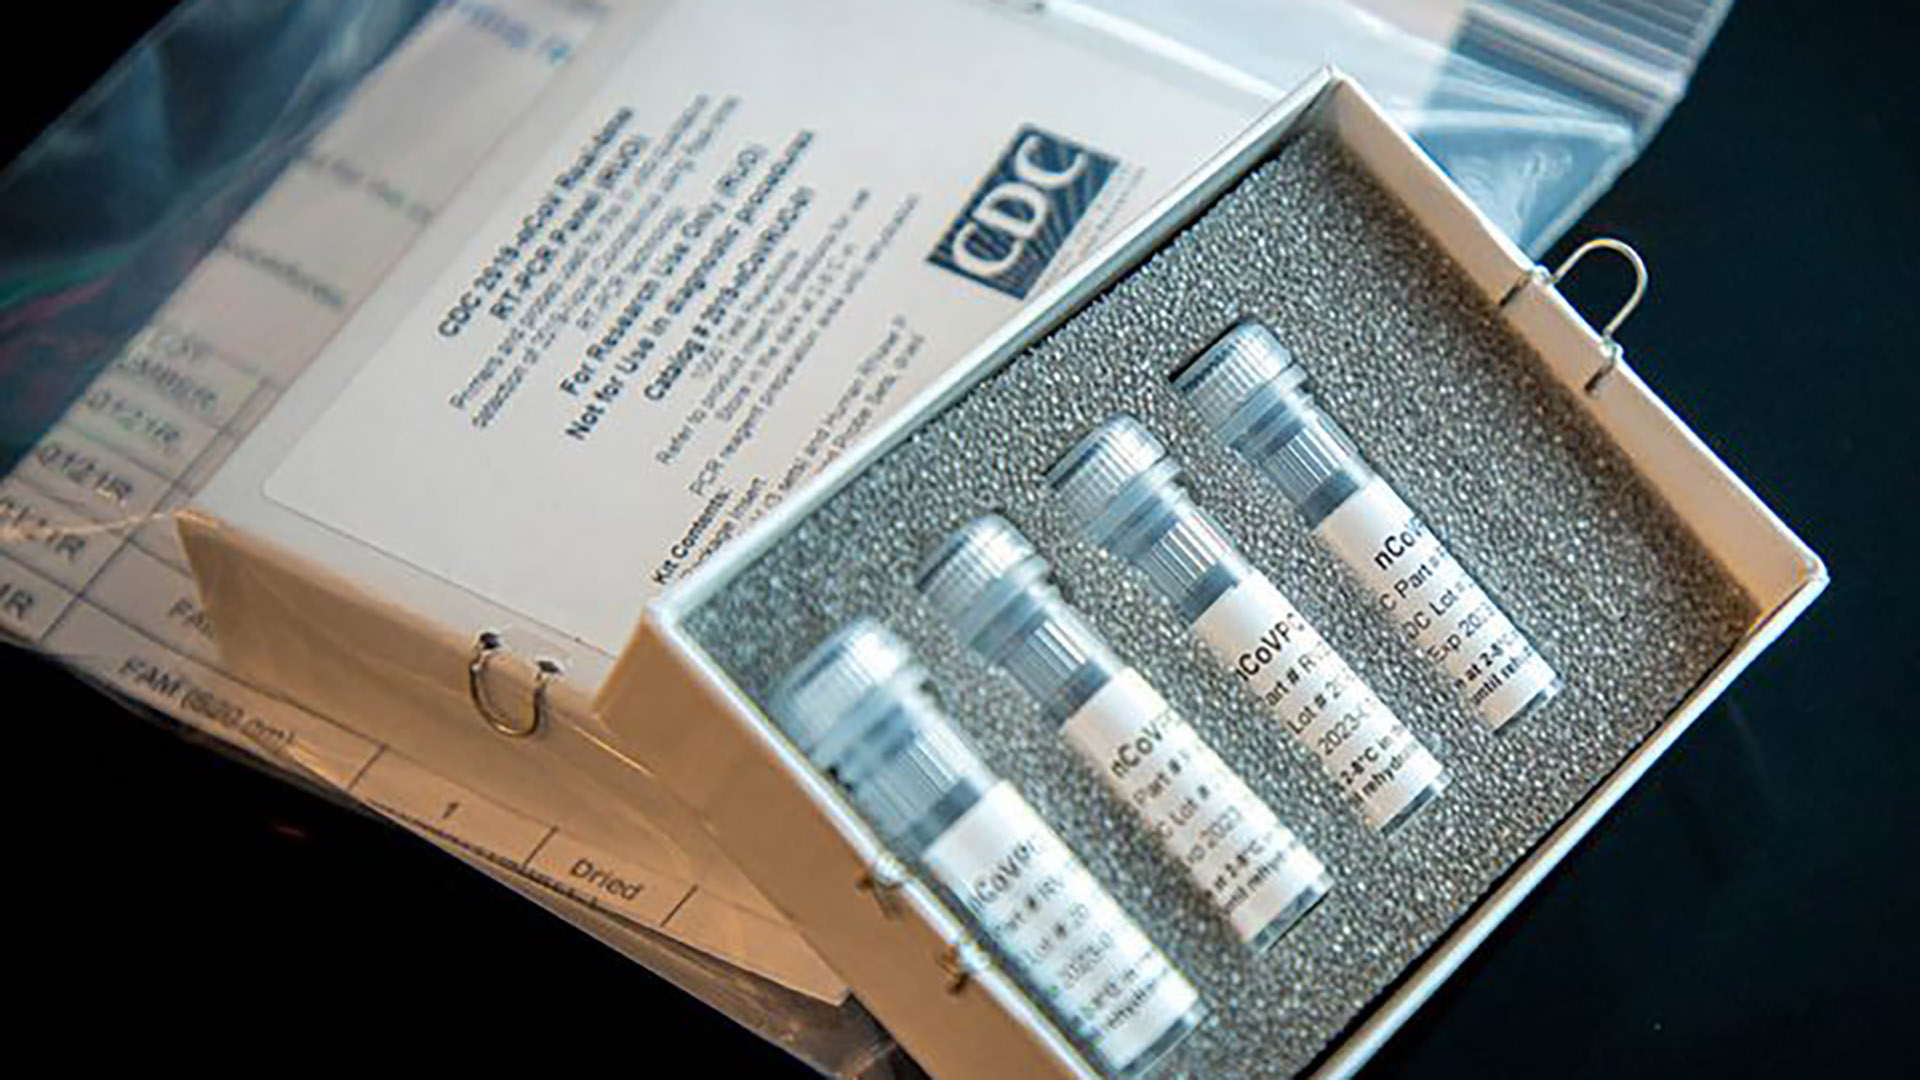 Lab test kit for the new coronavirus that causes COVID-19. (U.S. Centers for Disease Control and Prevention)